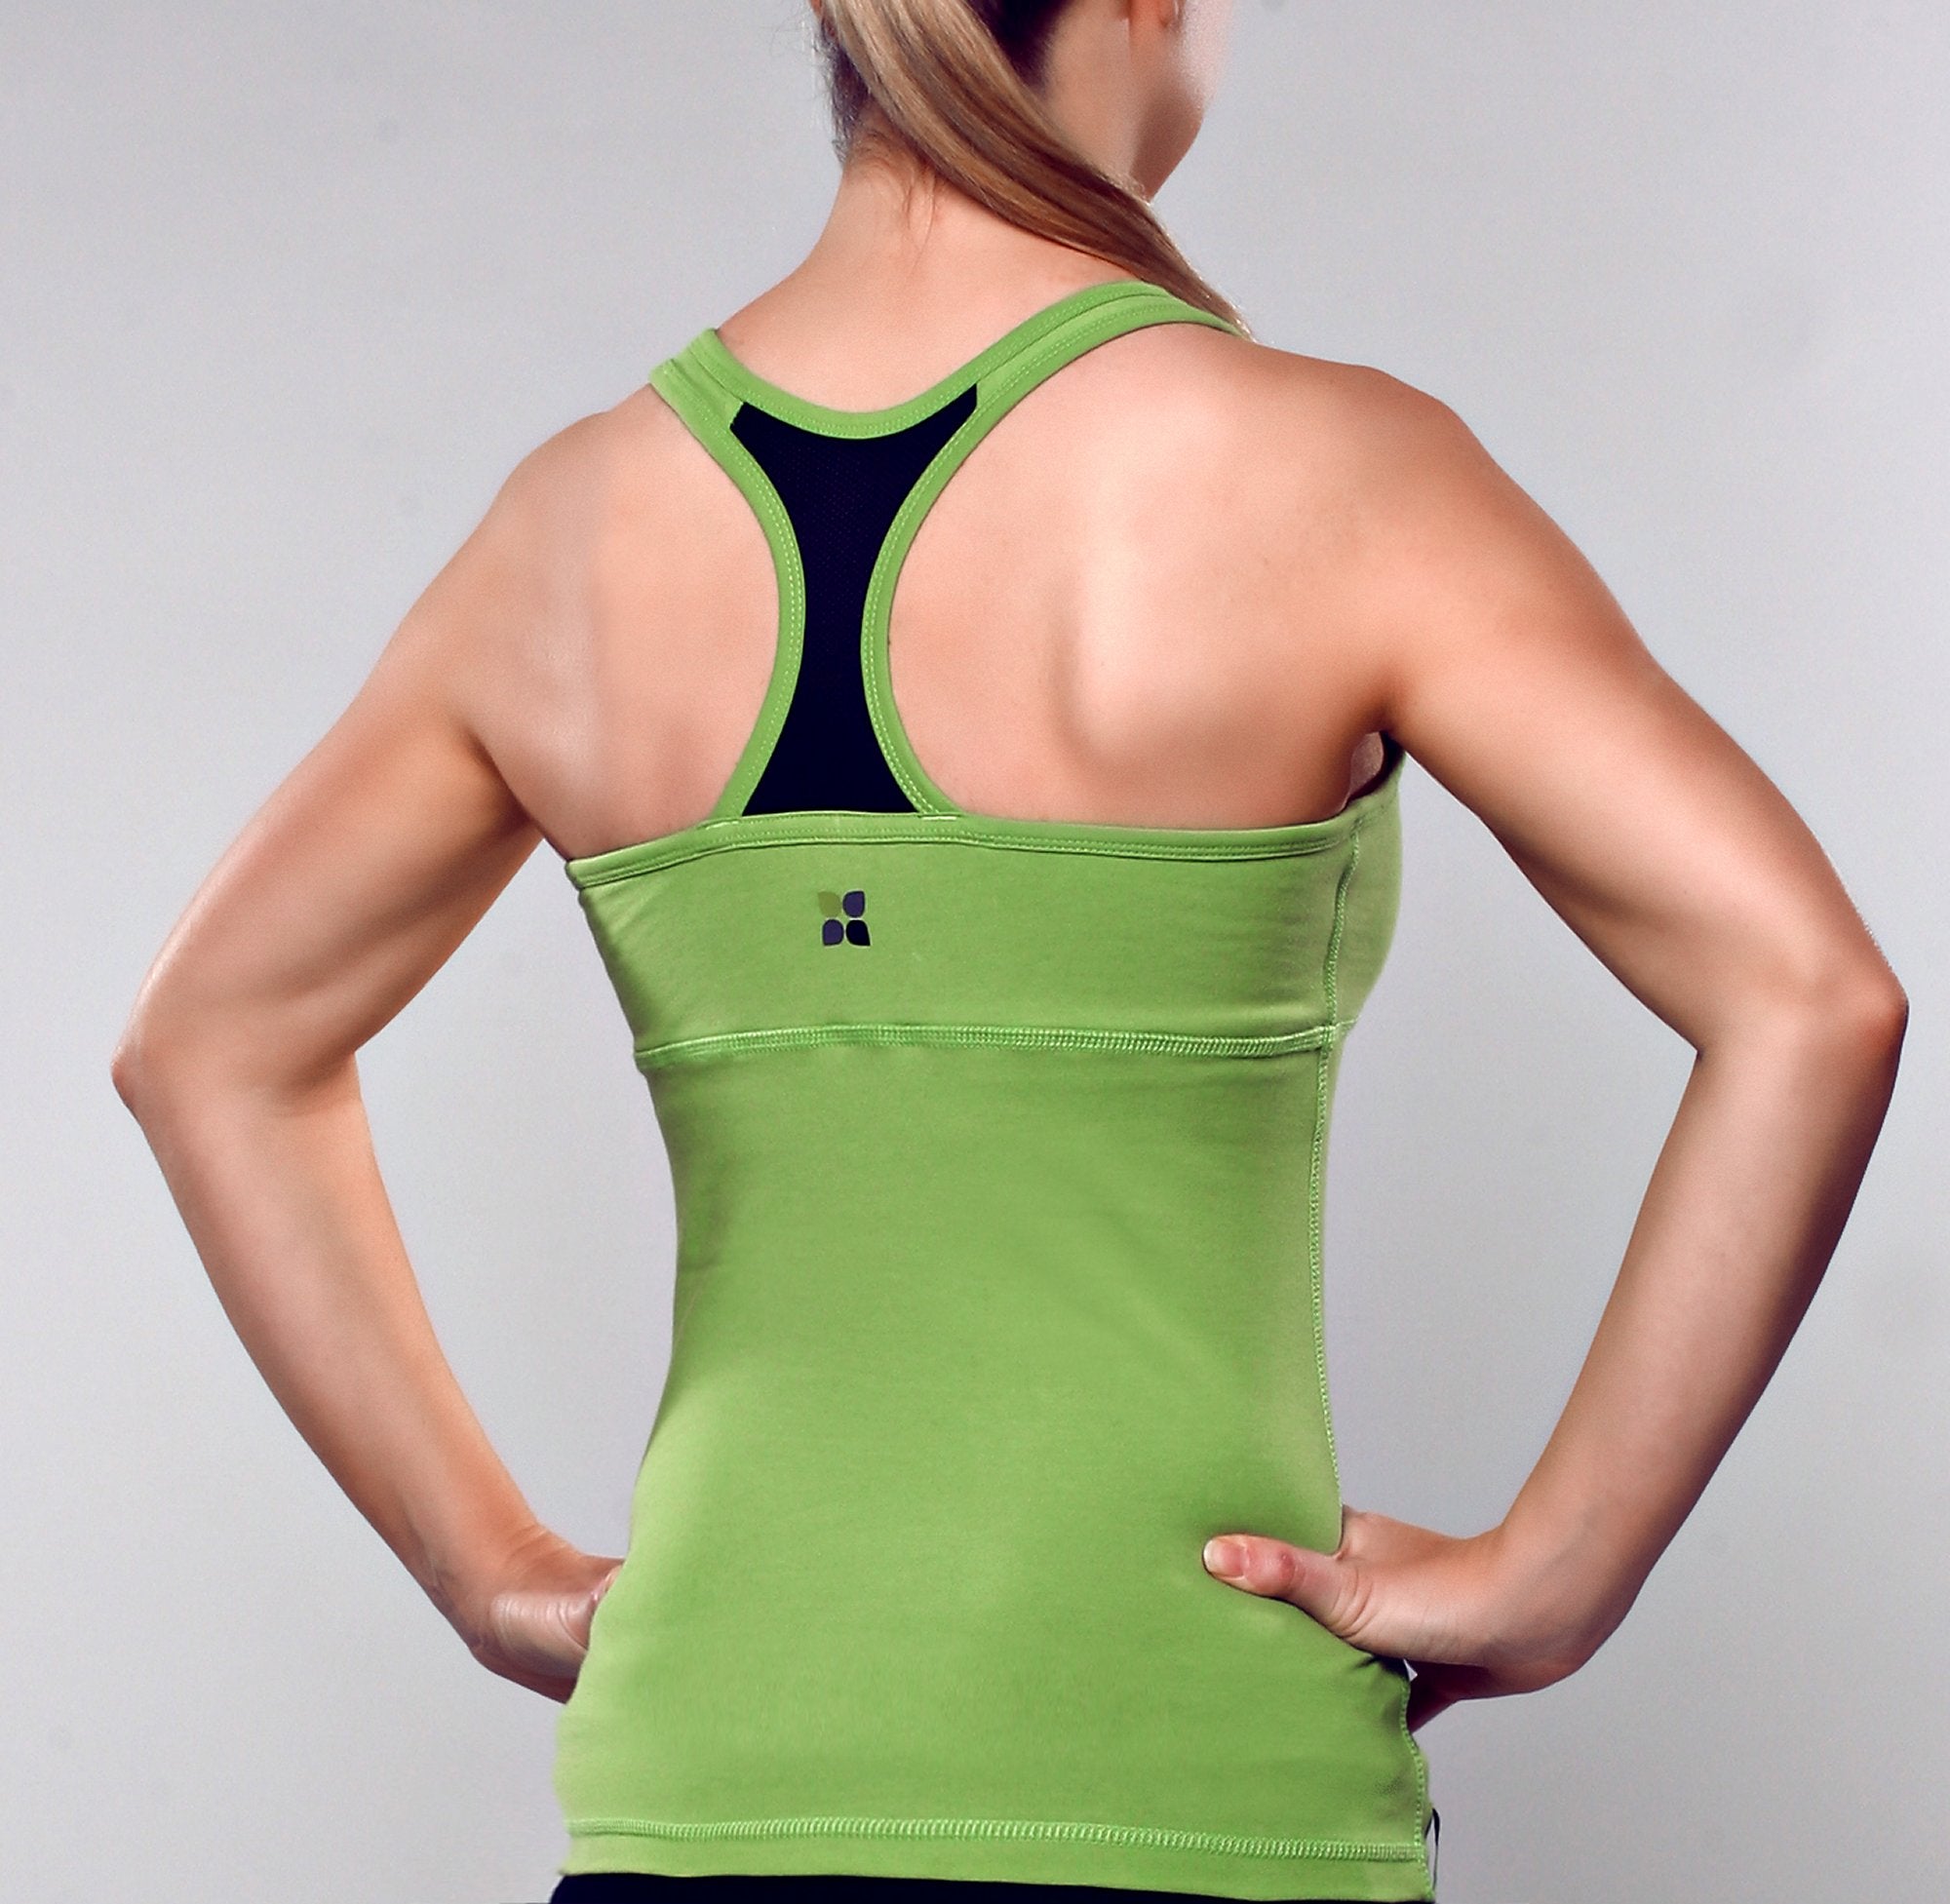 Model wearing apple green color racer back tank top with black contrast fabric at center back